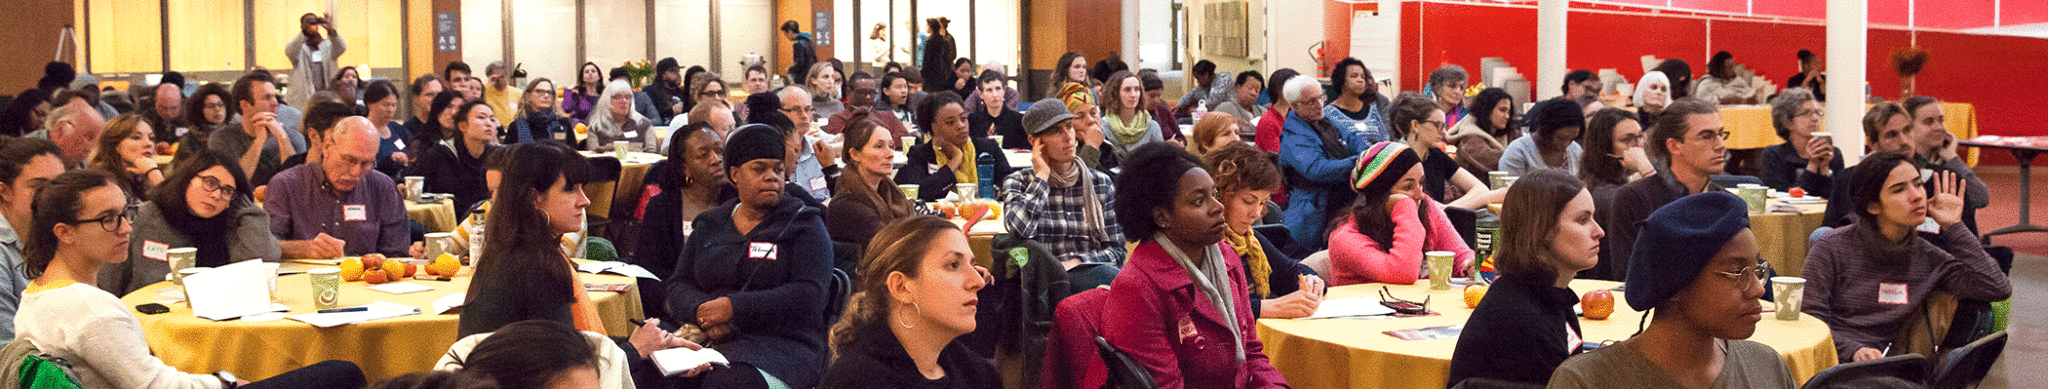 Attendees of the Black Liberation and the Food Movement event.